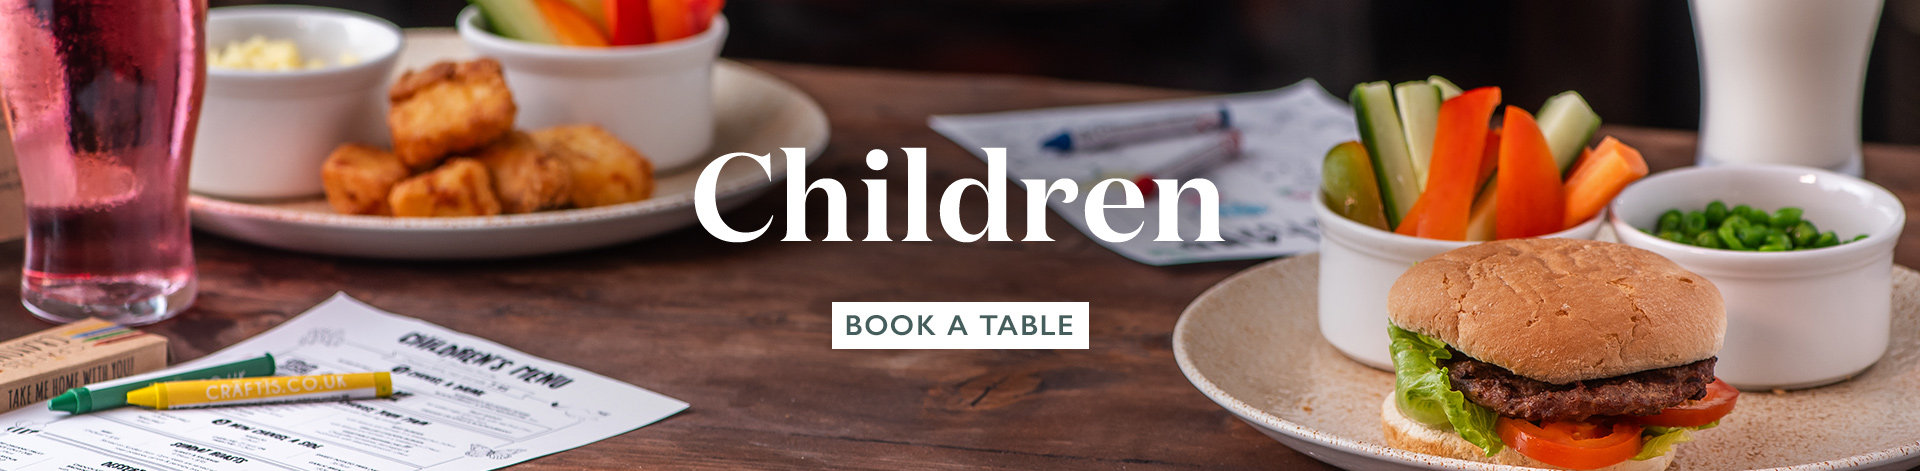 Children's Menu at The Thatched House